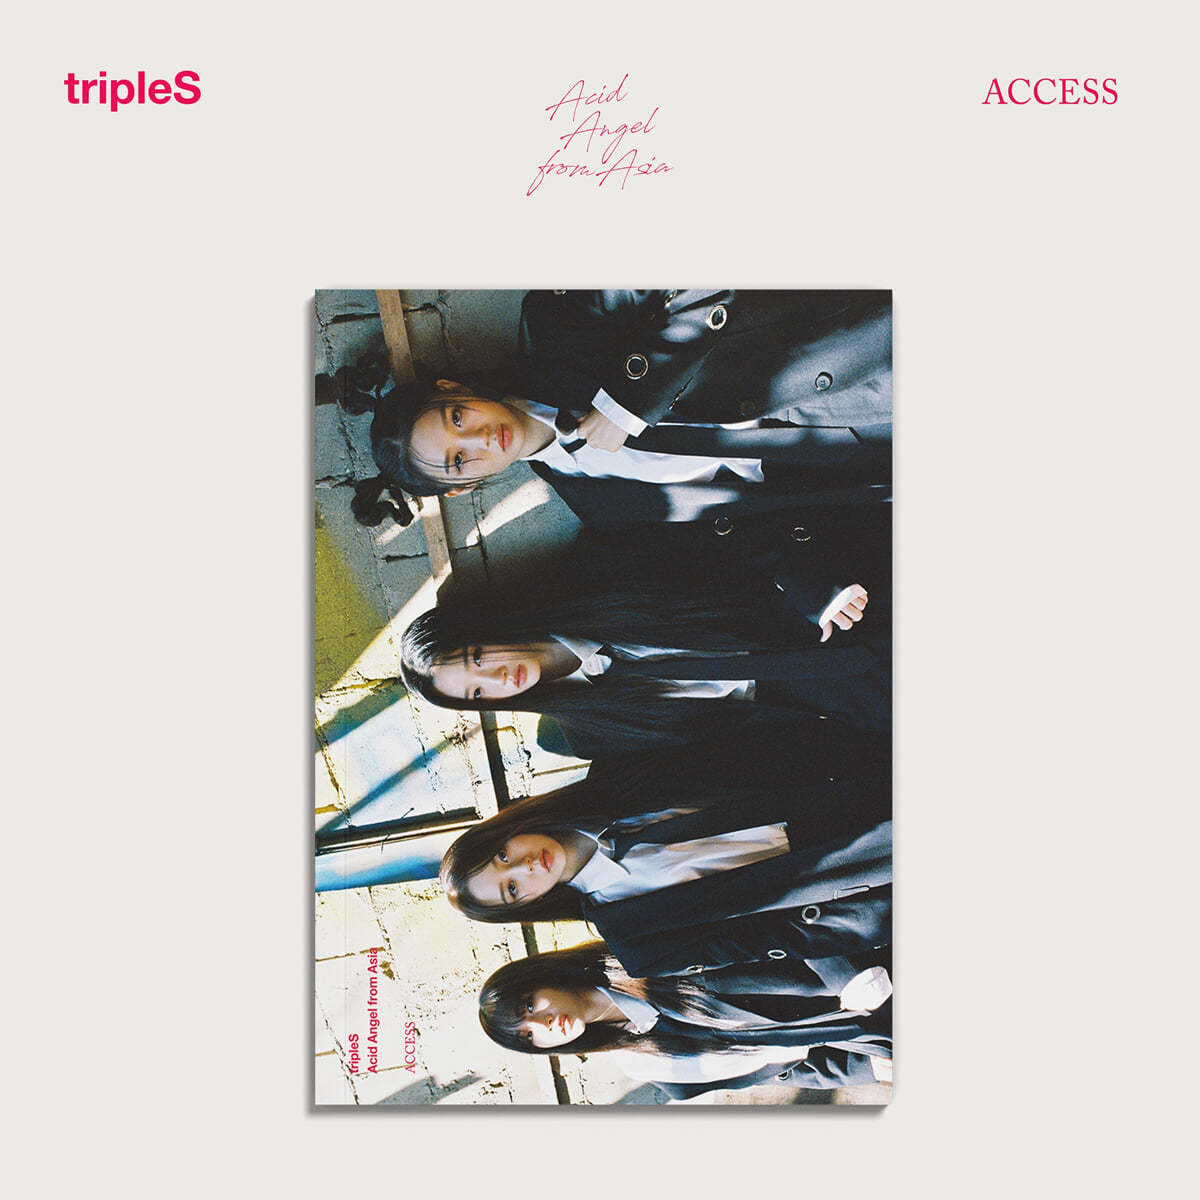 tripleS (트리플에스) - Acid Angel from Asia [A ver.]